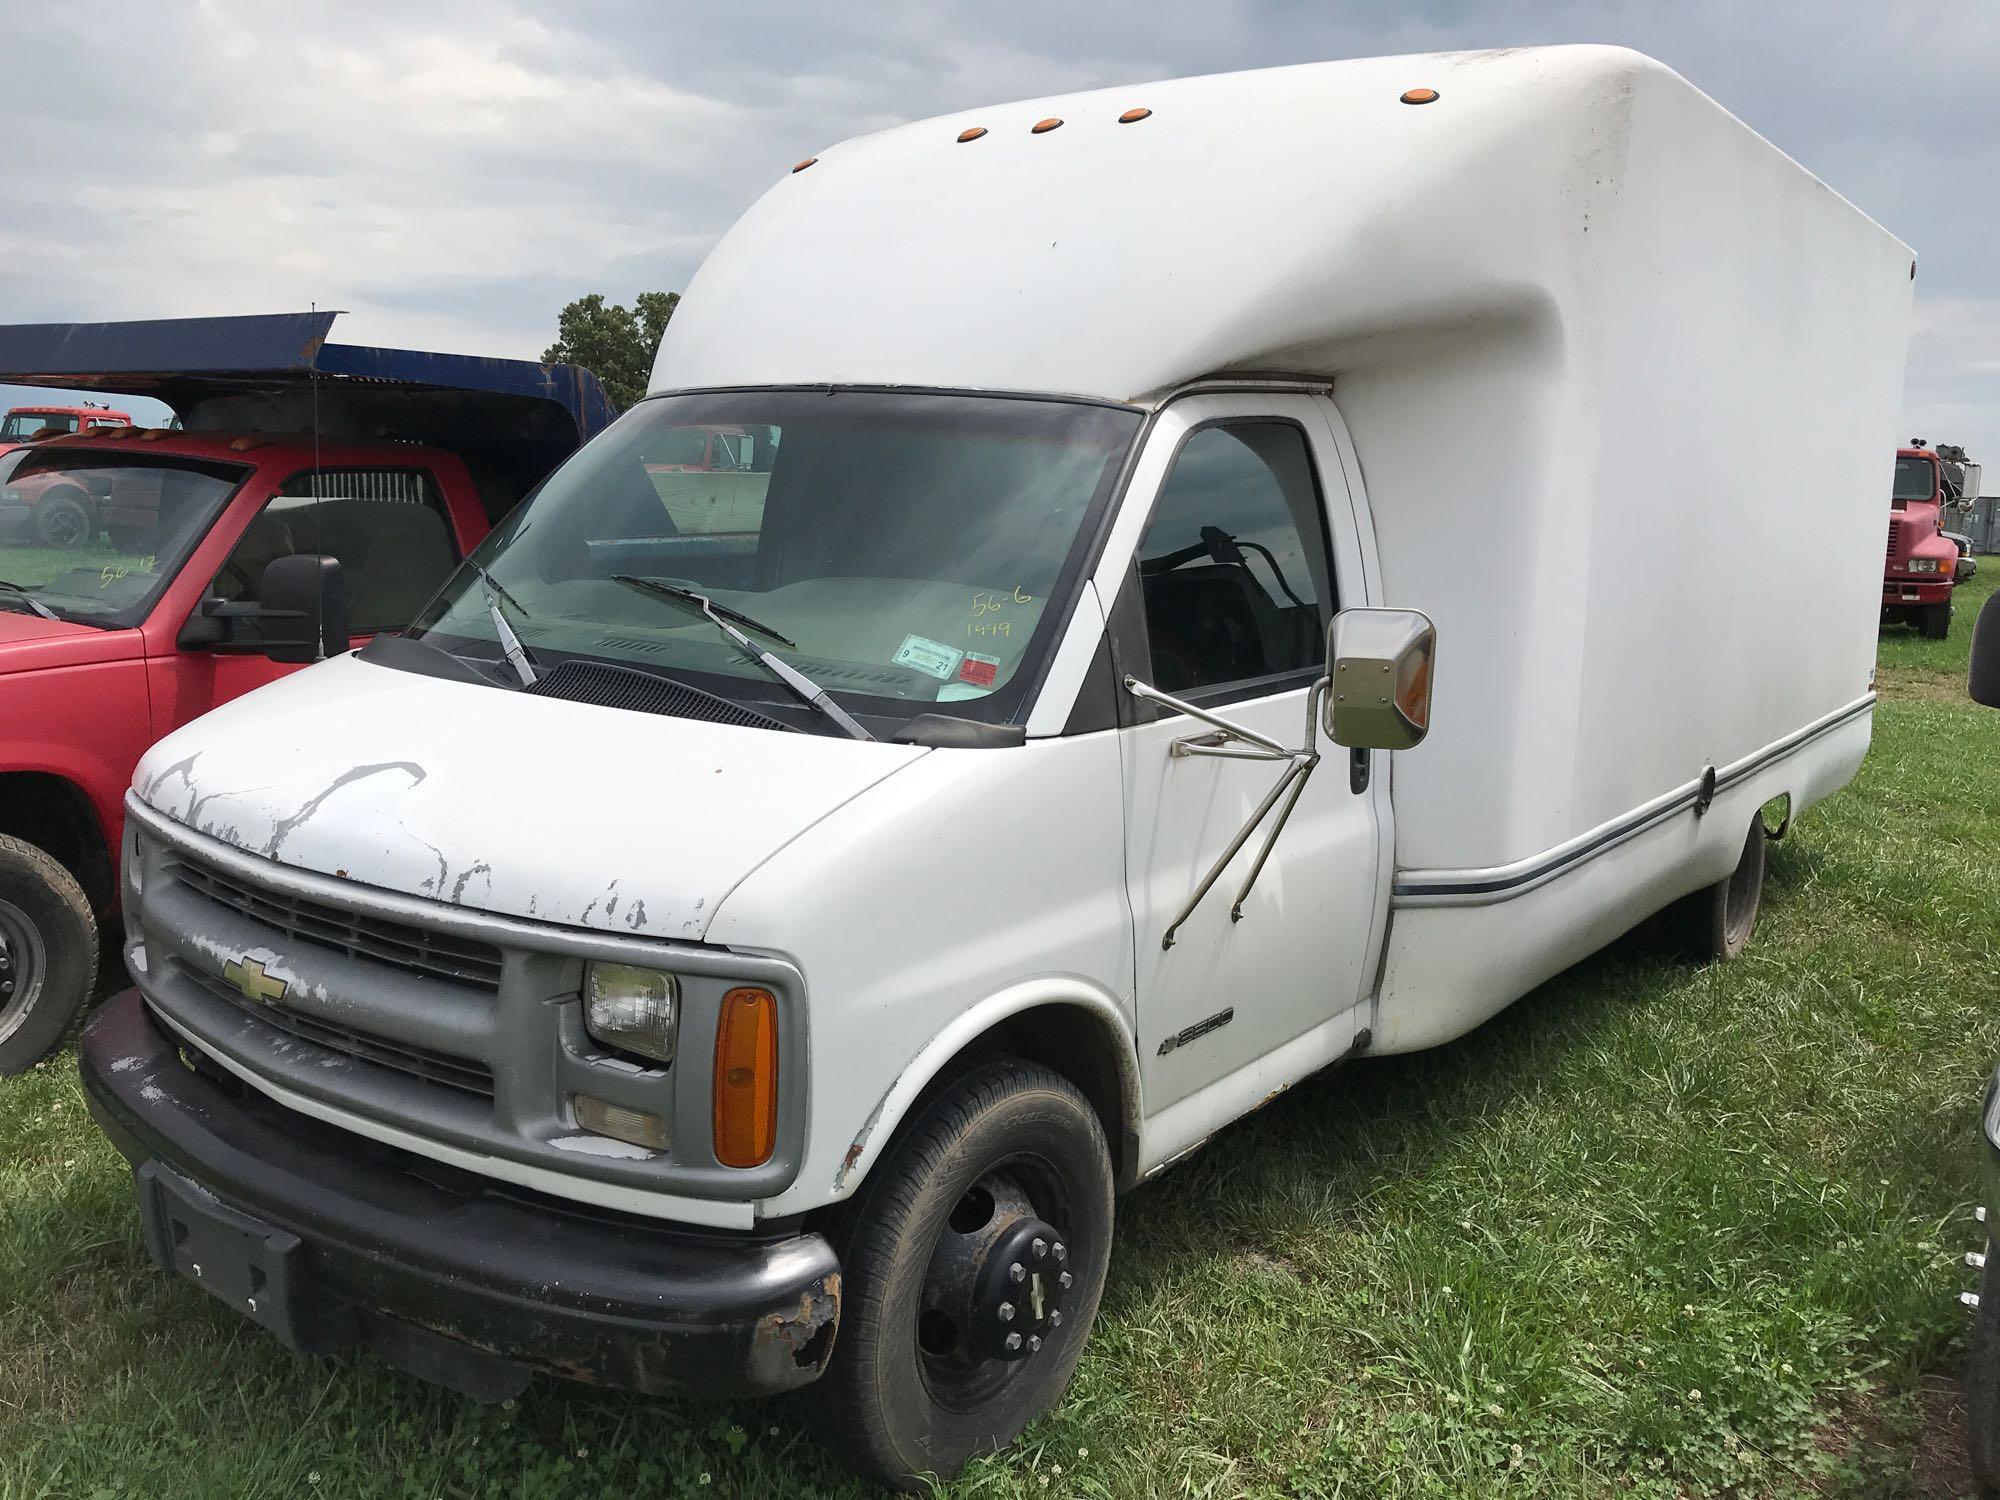 1999 Chevy Express 3500 high top van, auto, g... | EFD Auction 2020 - Heavy  Trucks and Trailers and vehicles - Ring 2 | RTI Auctions